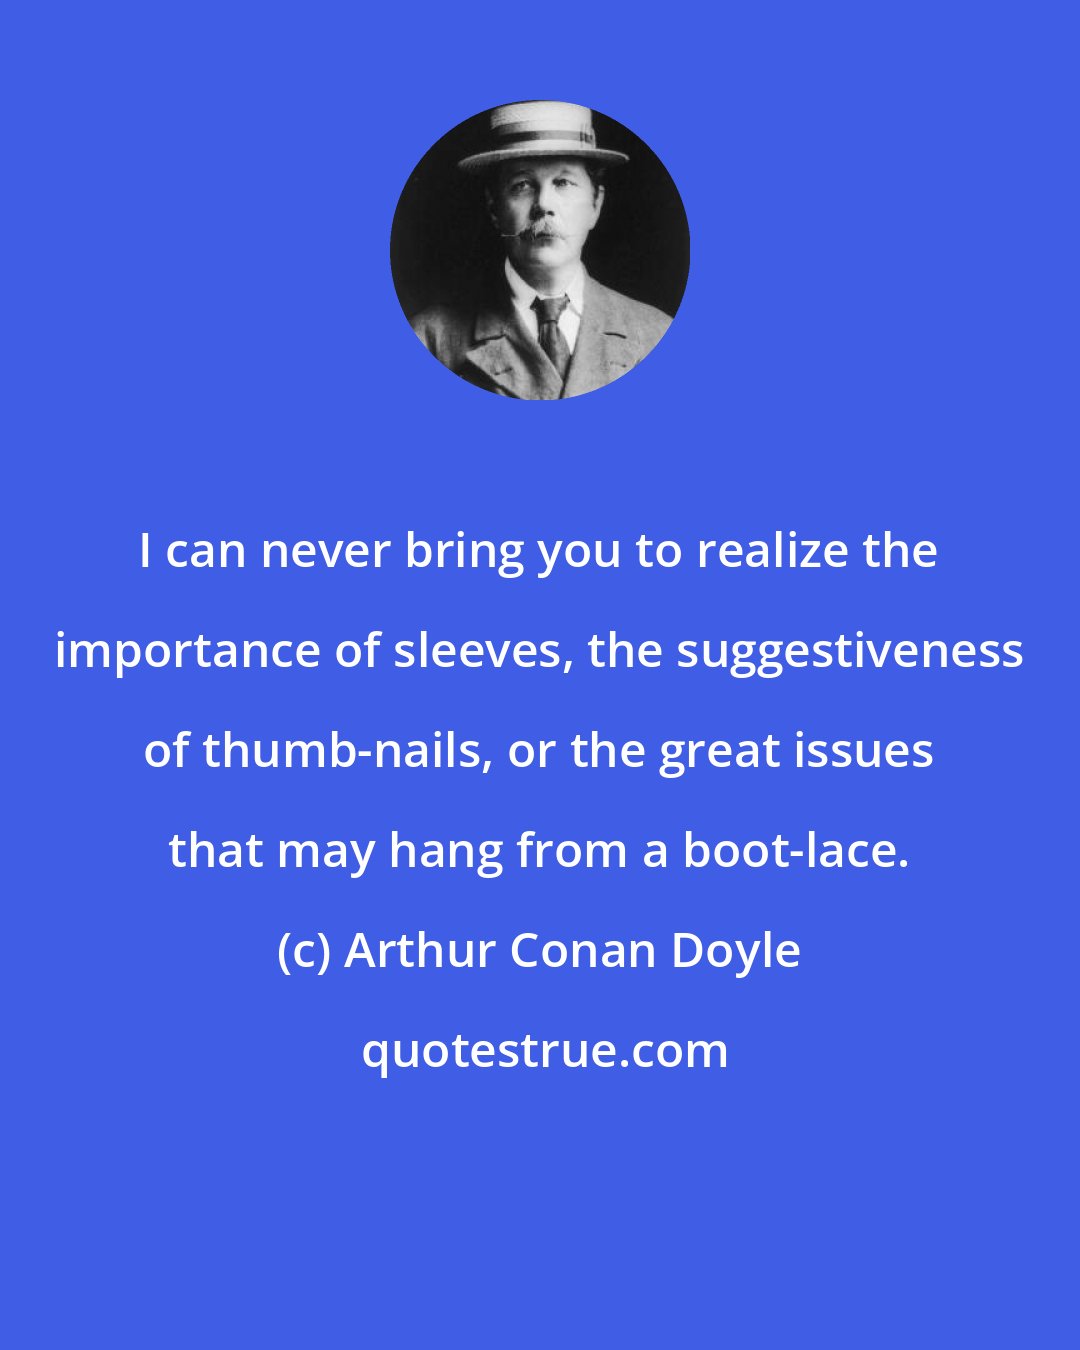 Arthur Conan Doyle: I can never bring you to realize the importance of sleeves, the suggestiveness of thumb-nails, or the great issues that may hang from a boot-lace.